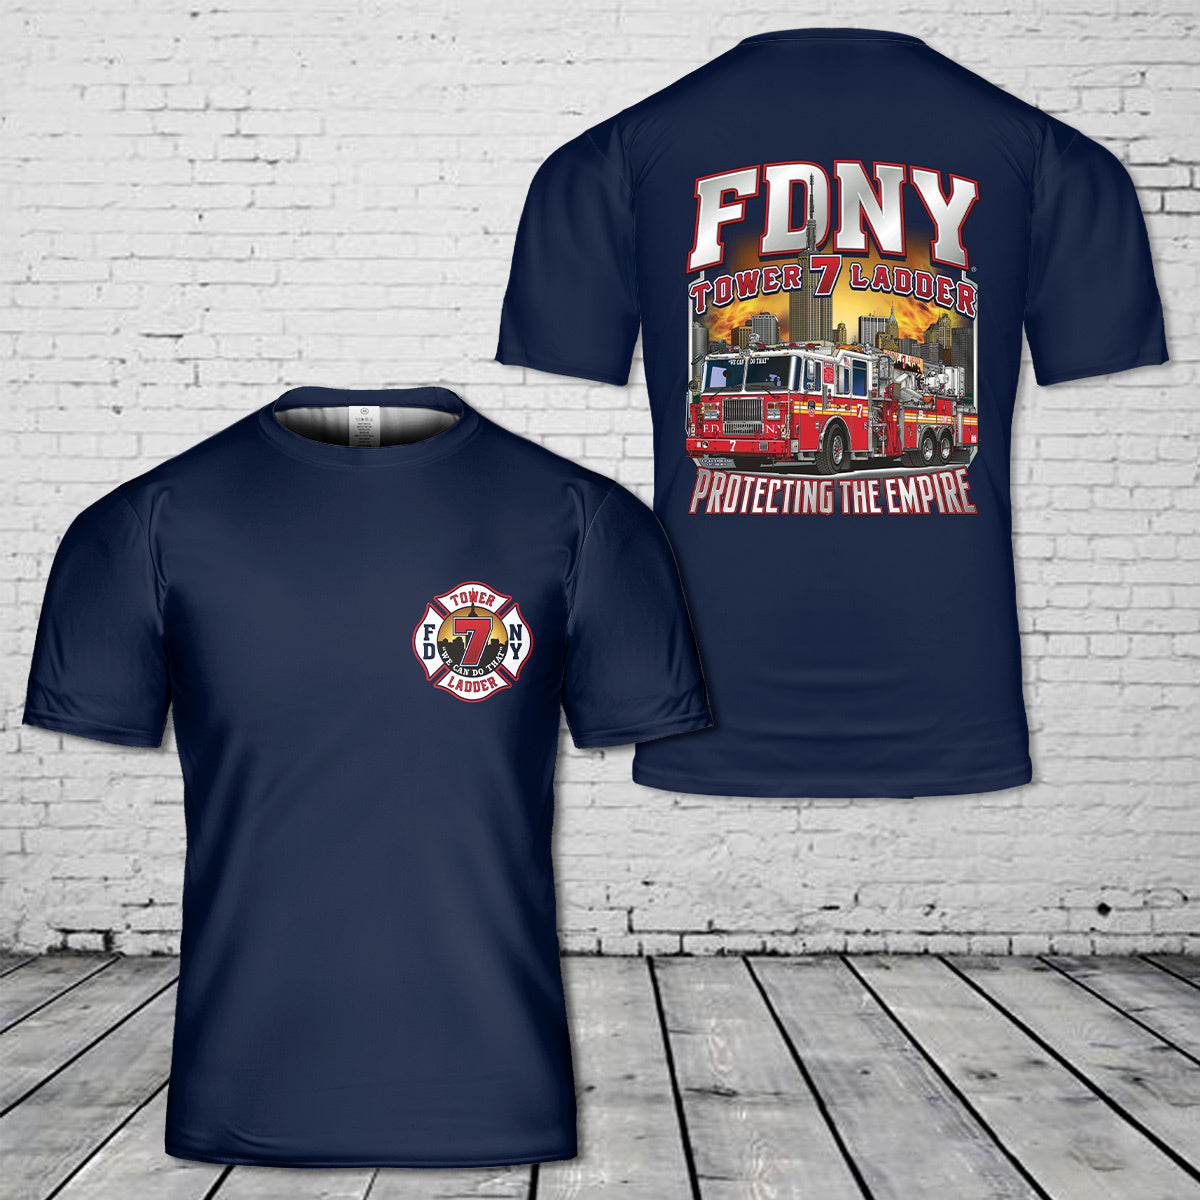 FDNY TL-7 "Protecting the Empire" Empire State Building T-Shirt 3D